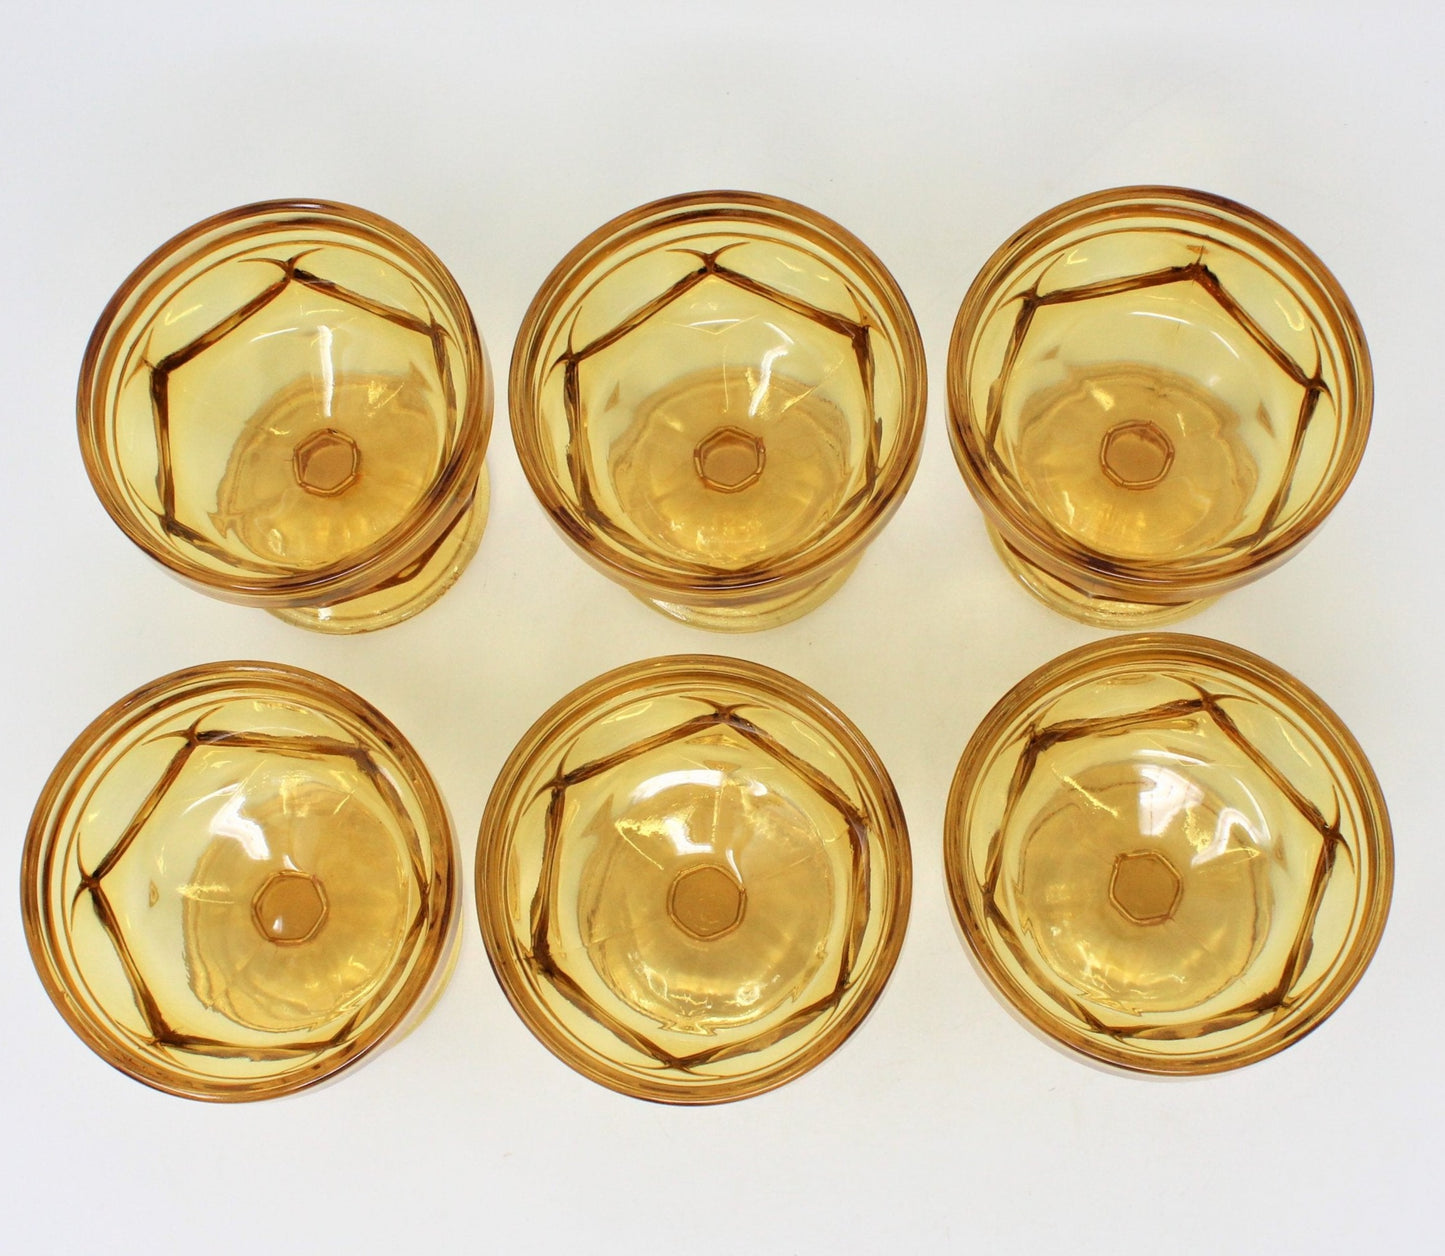 Champagne / Low Sherbet, Anchor Hocking, Fairfield, Amber Glass, Set of 6, Vintage